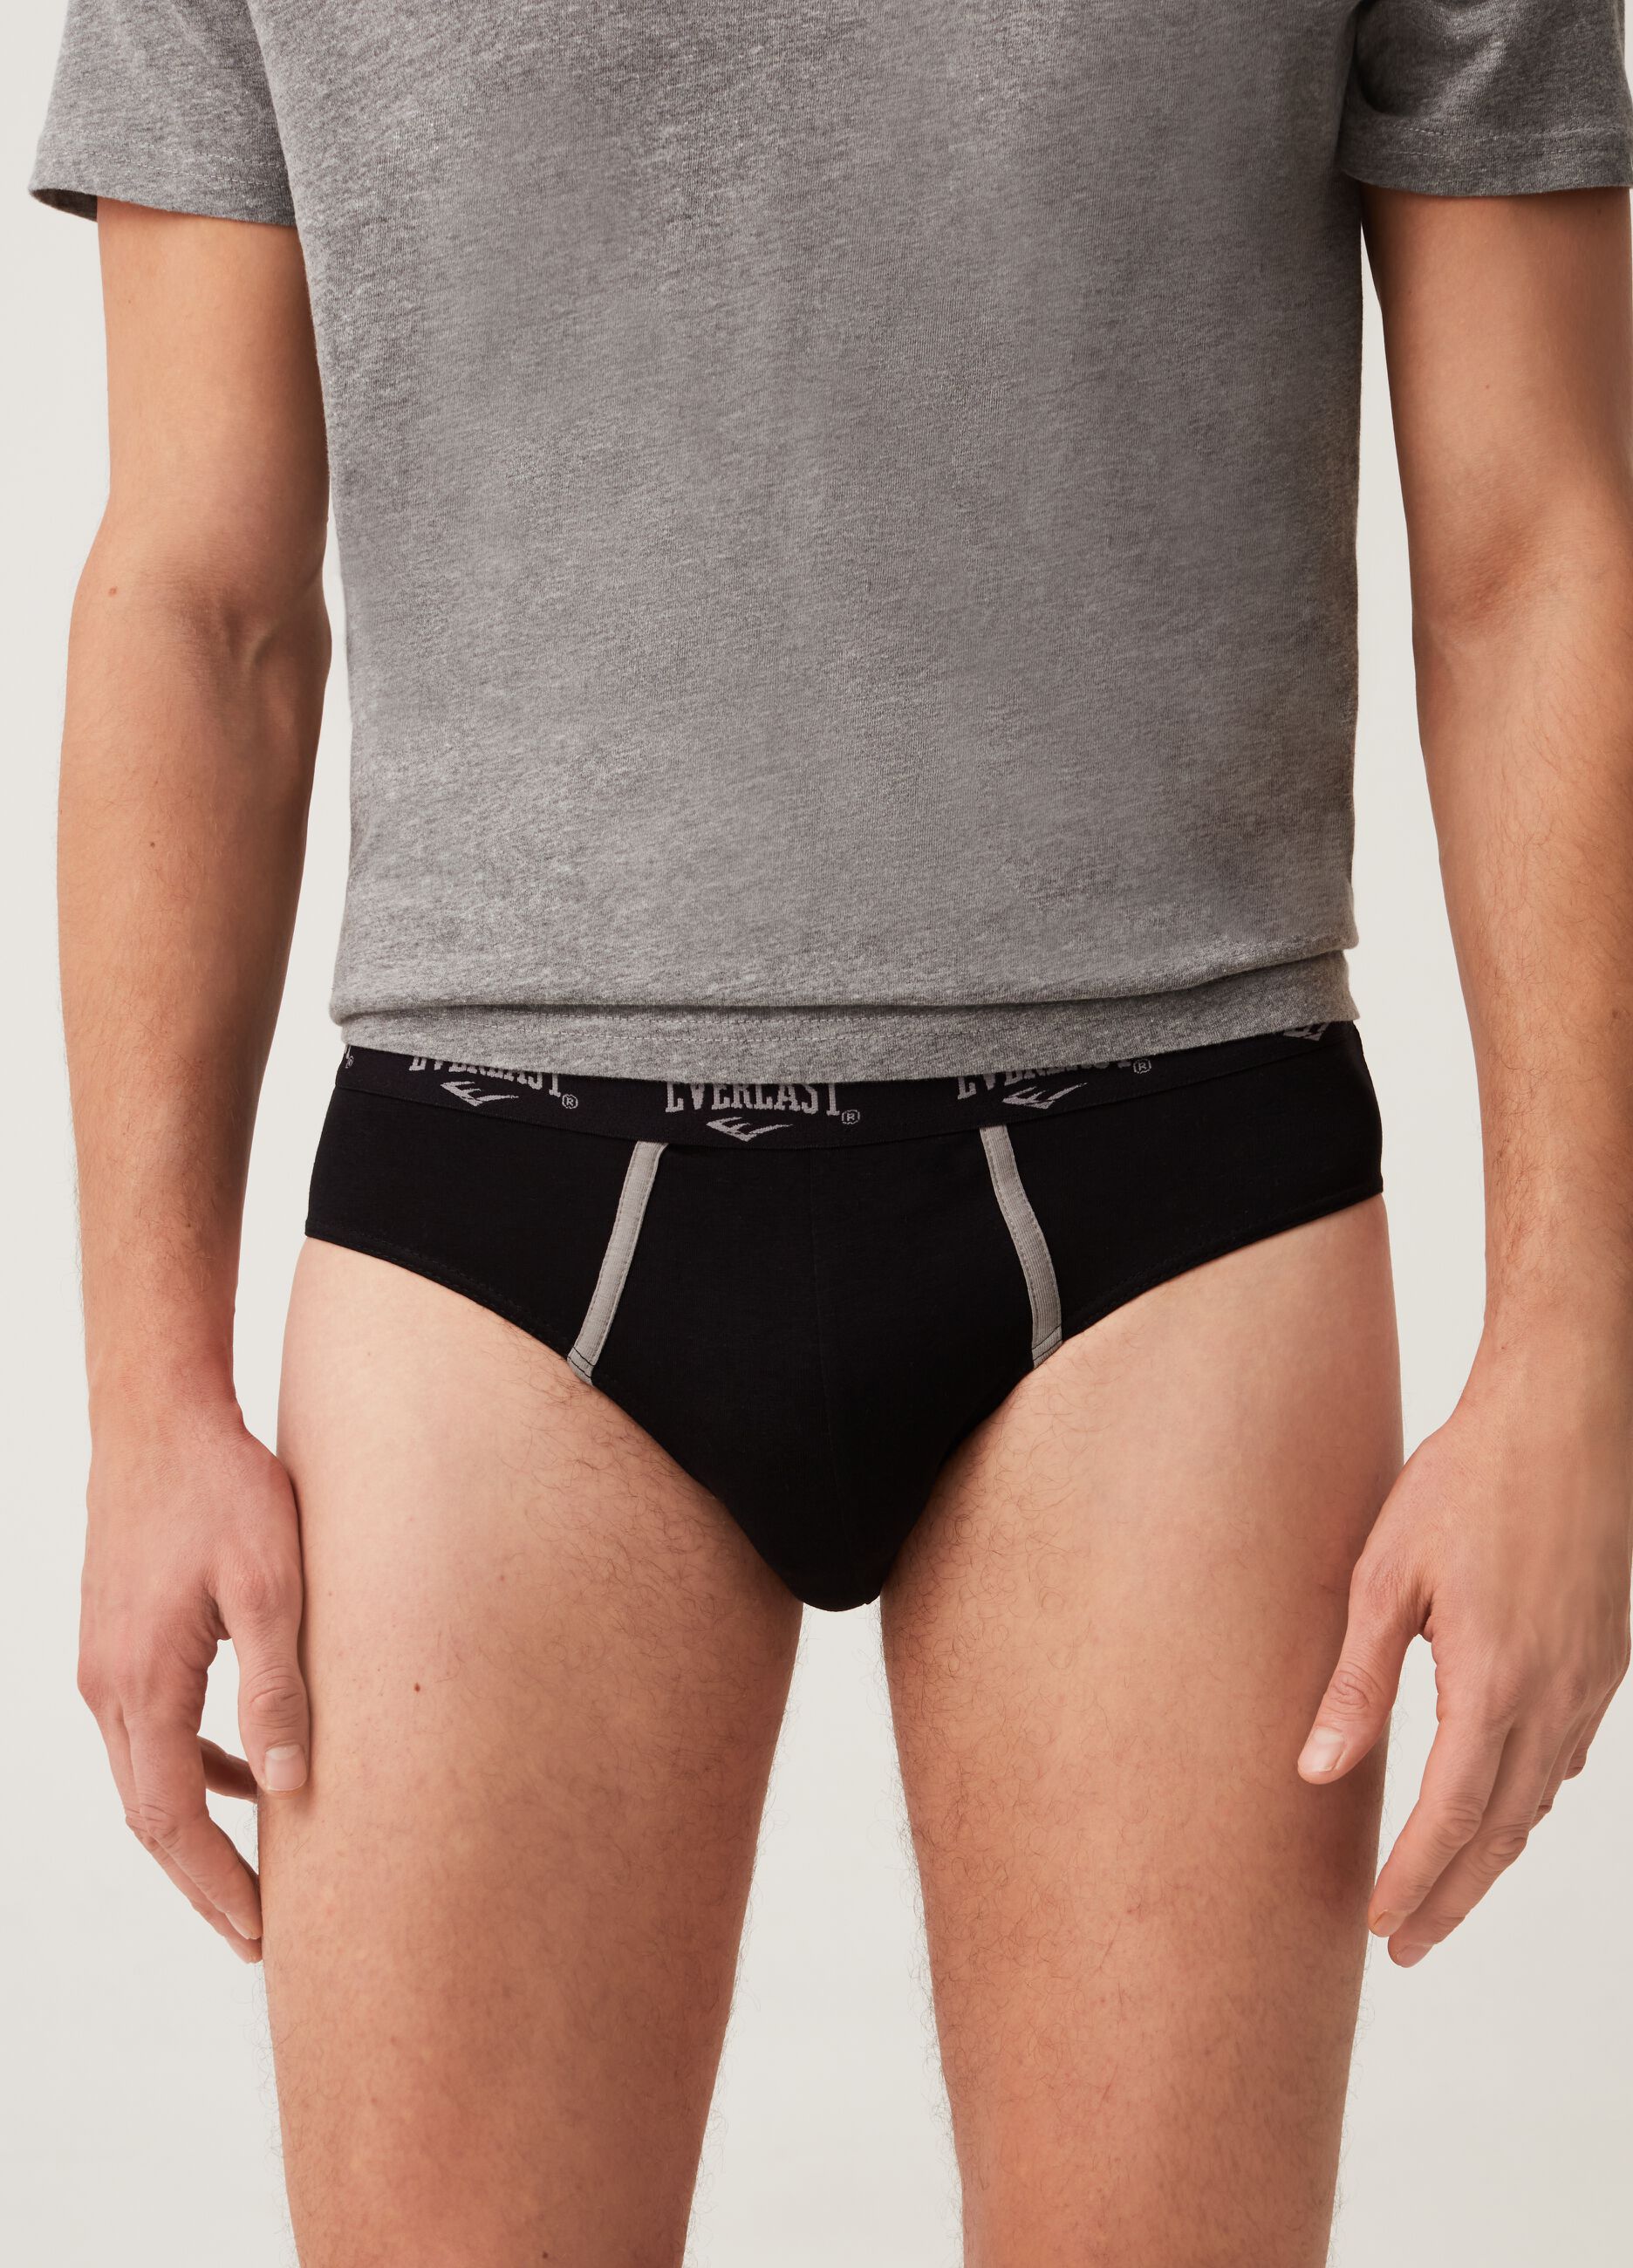 EVERLAST INTIMO Man's Black Three-pack Everlast briefs with contrasting  trims